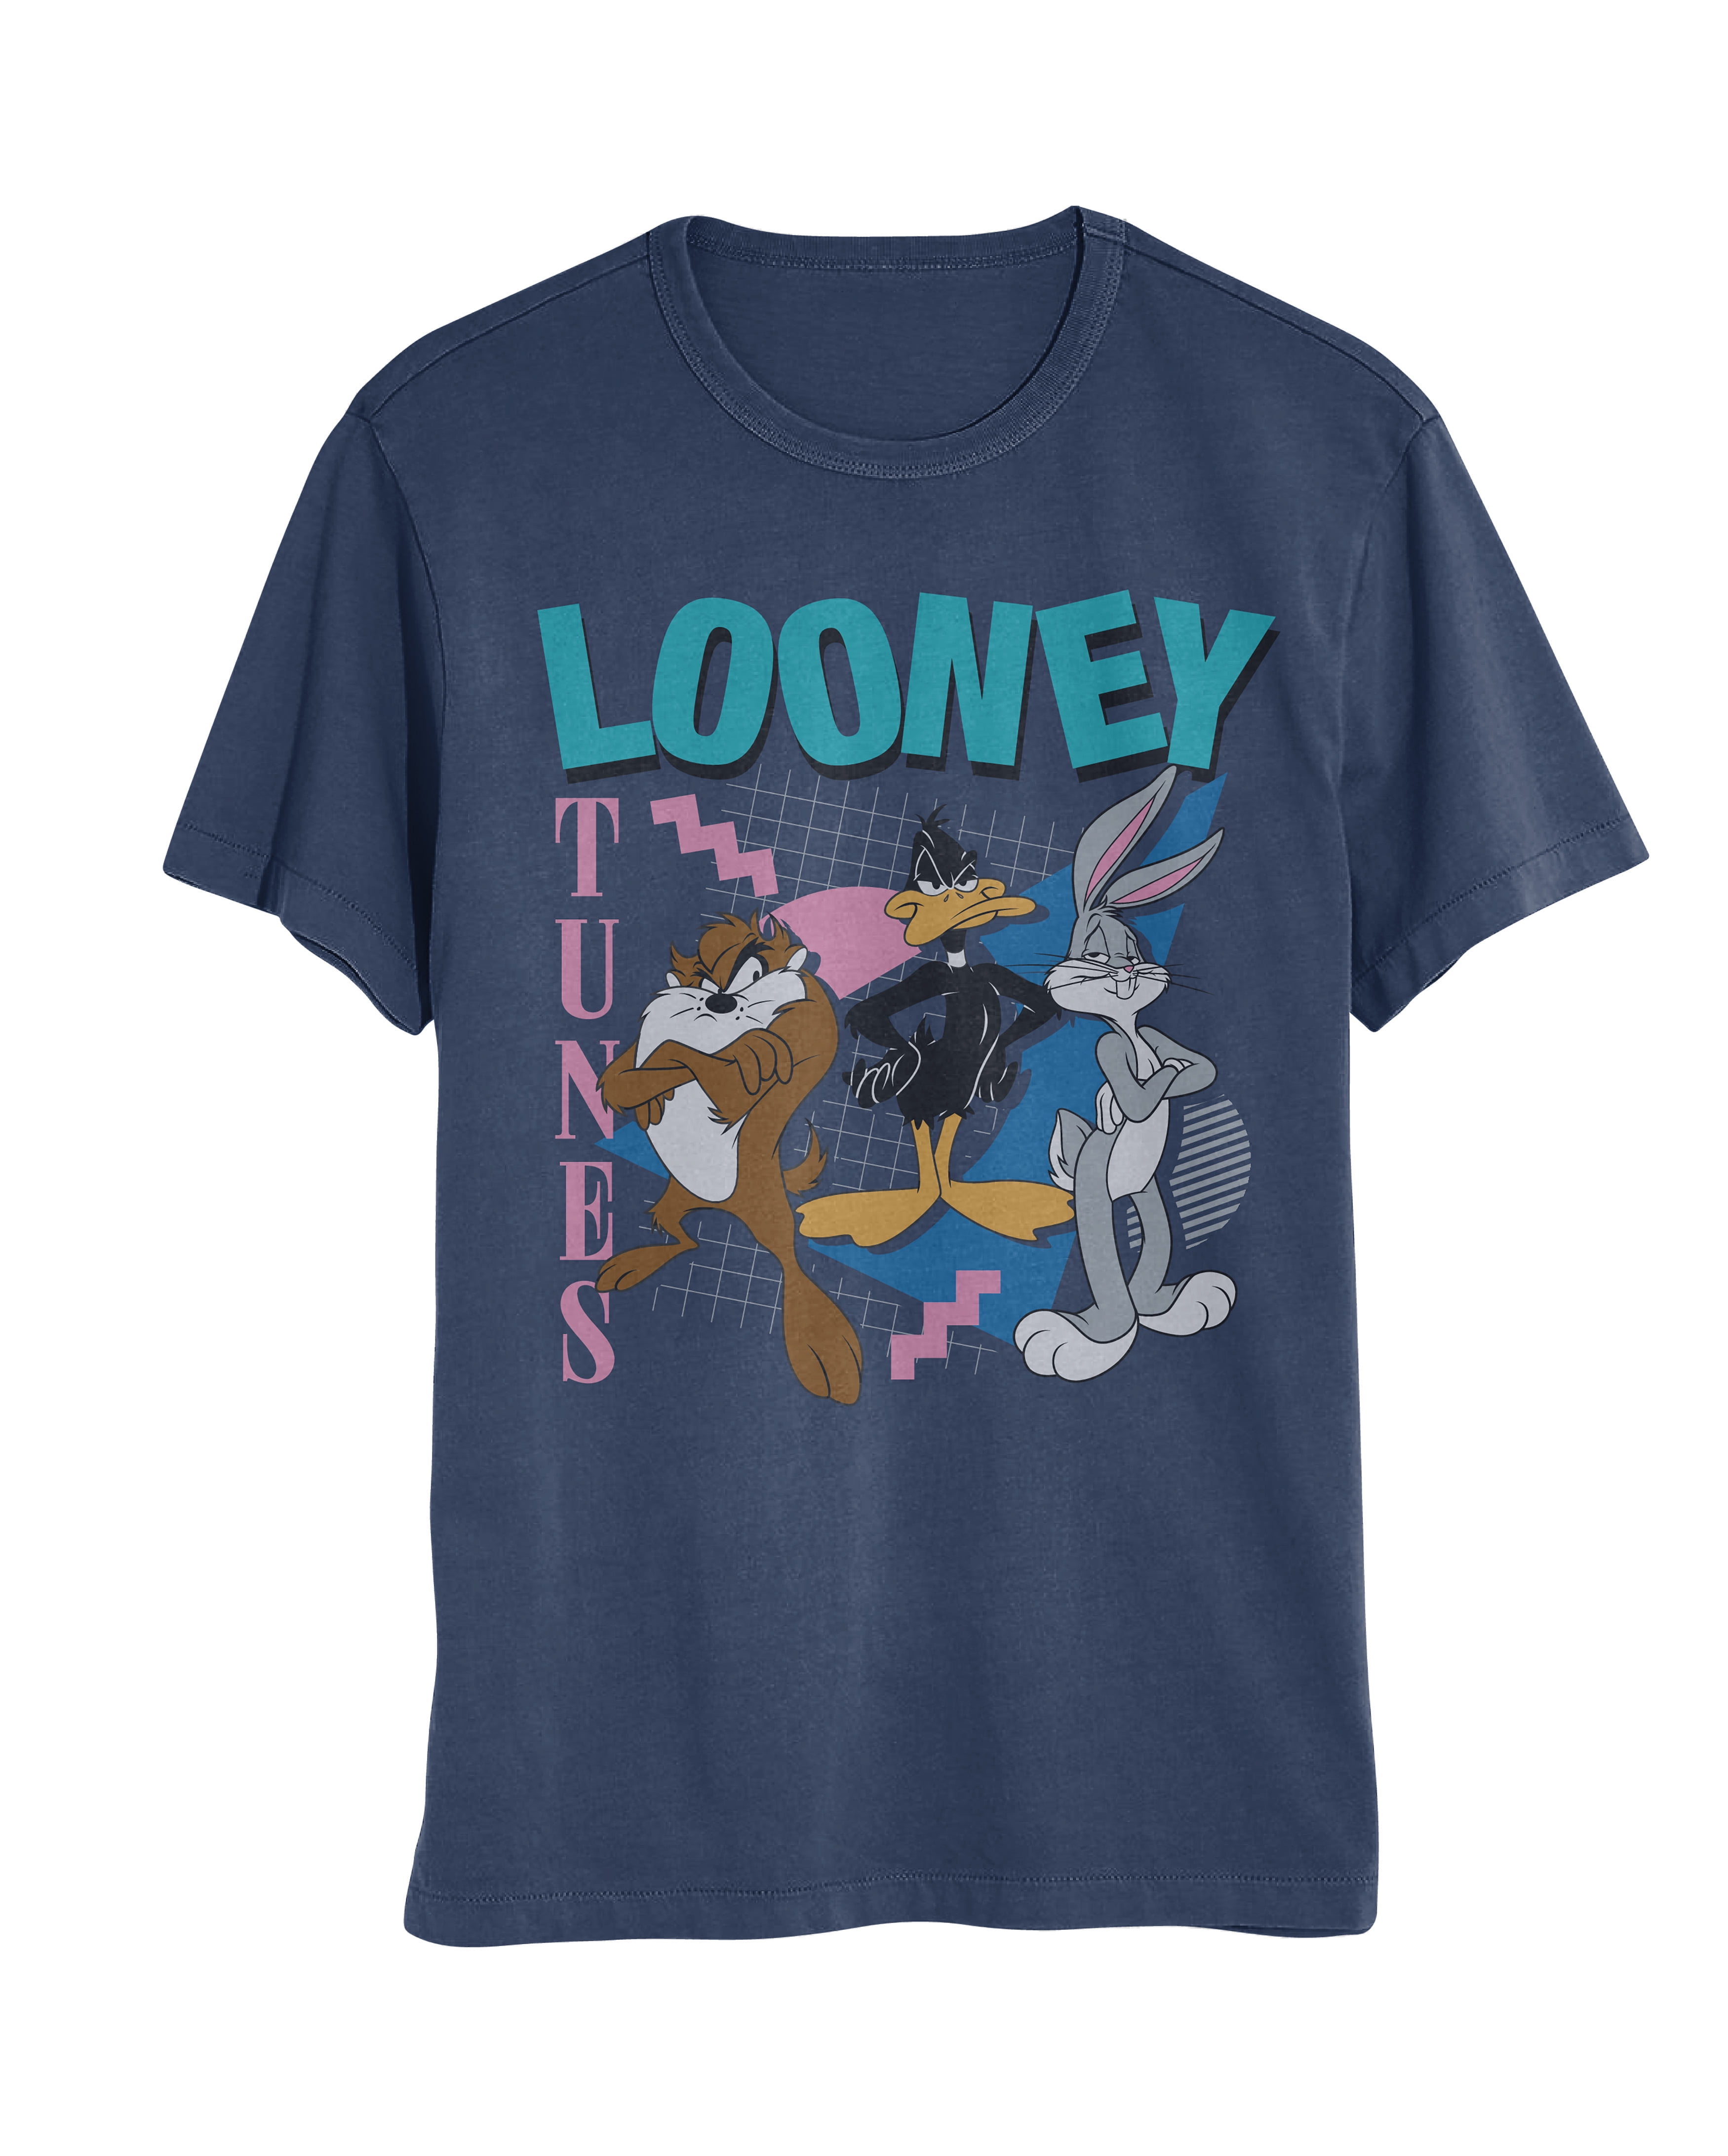 Bunny Womens Daffy S-XXL) Taz, Tunes and Looney Bugs Short Sleeve (White, and T-Shirt Mens